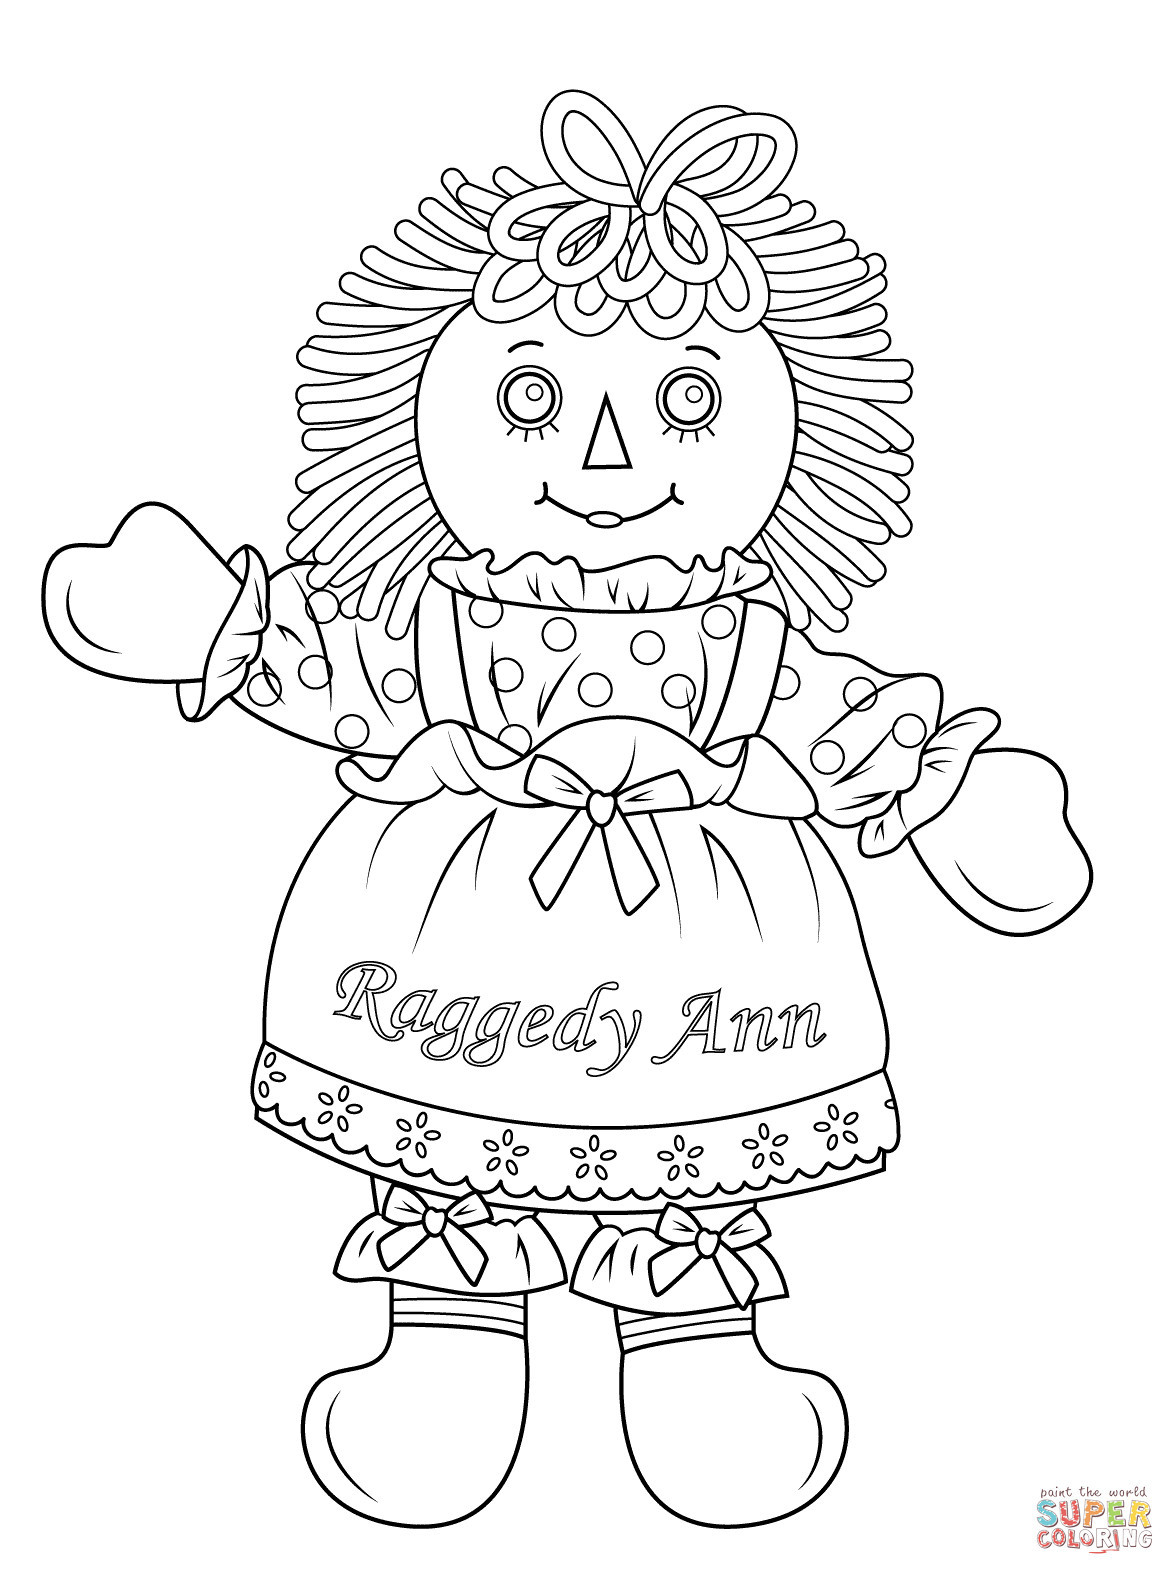 American Girl Doll Isabelle Coloring Pages
 American Girl Coloring Pages Isabelle at GetColorings